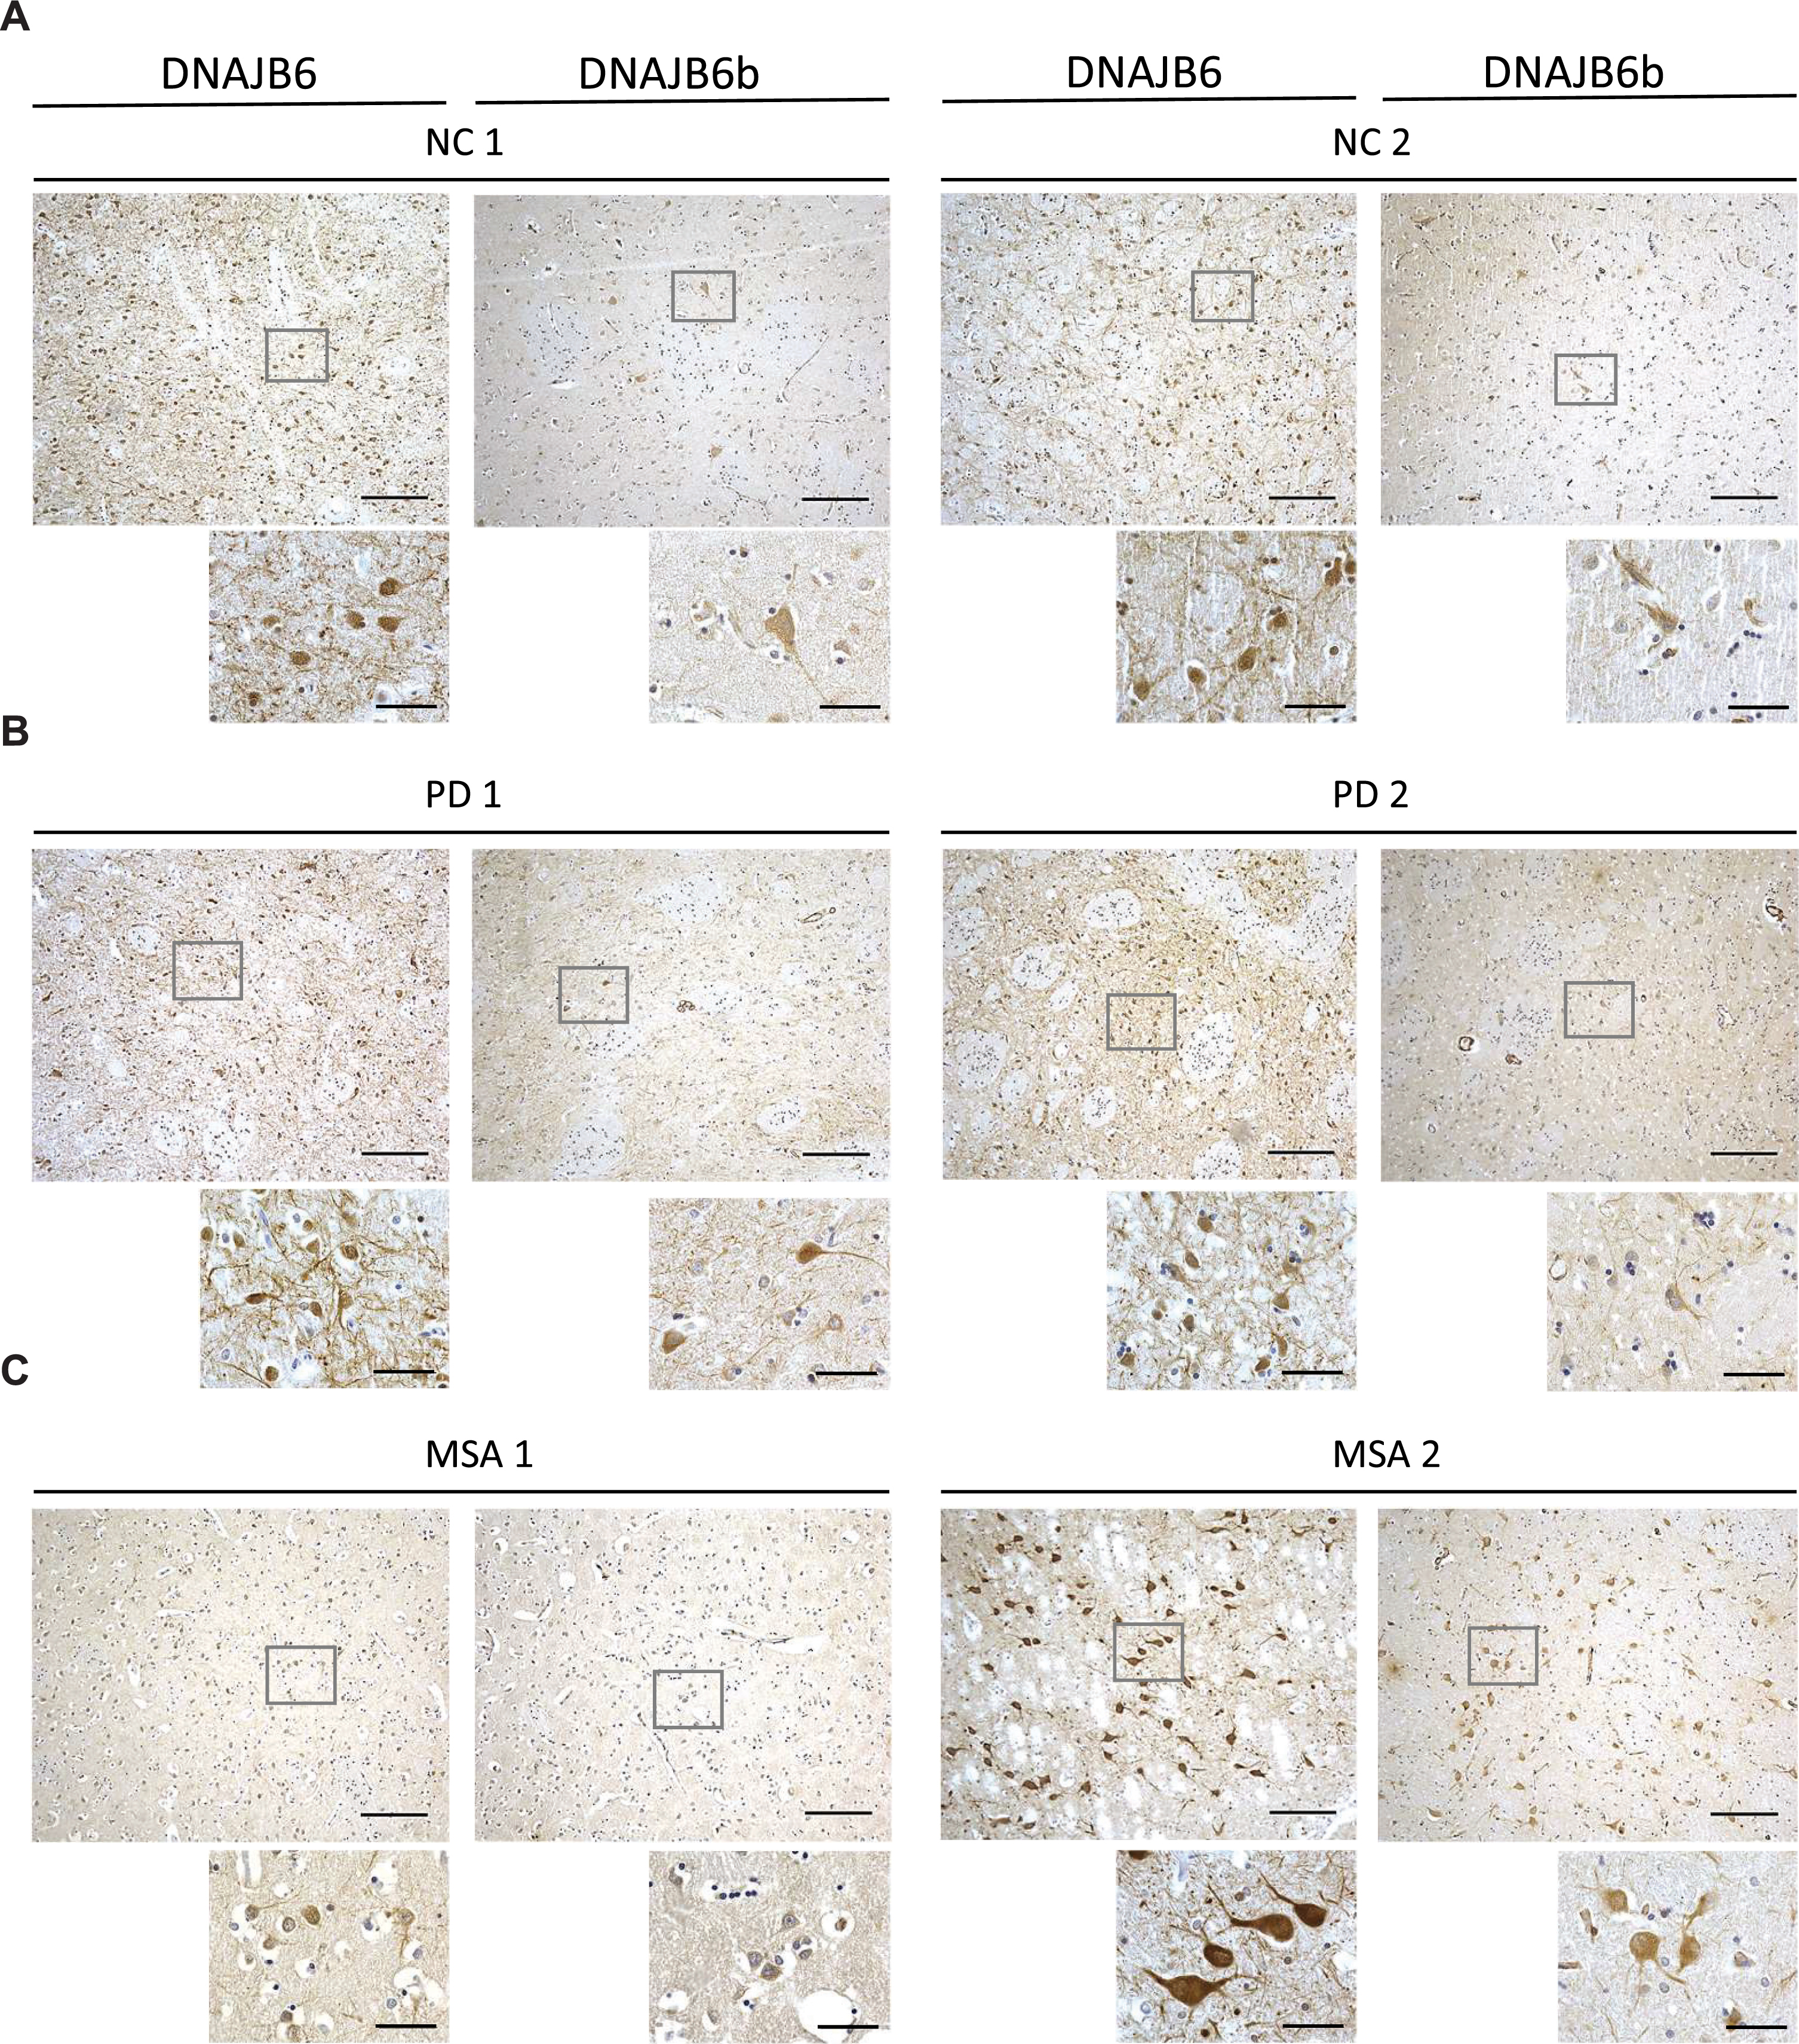 Micrographs showing DNAJB6 and DNJB6B stained sections of the putamen from (A) 2 normal controls, (B) 2 PD patients, and (C) 2 MSA patients at ×10 (large pictures, scale bar = 200αm) and ×60 (small pictures, scale bar = 50αm) magnification.